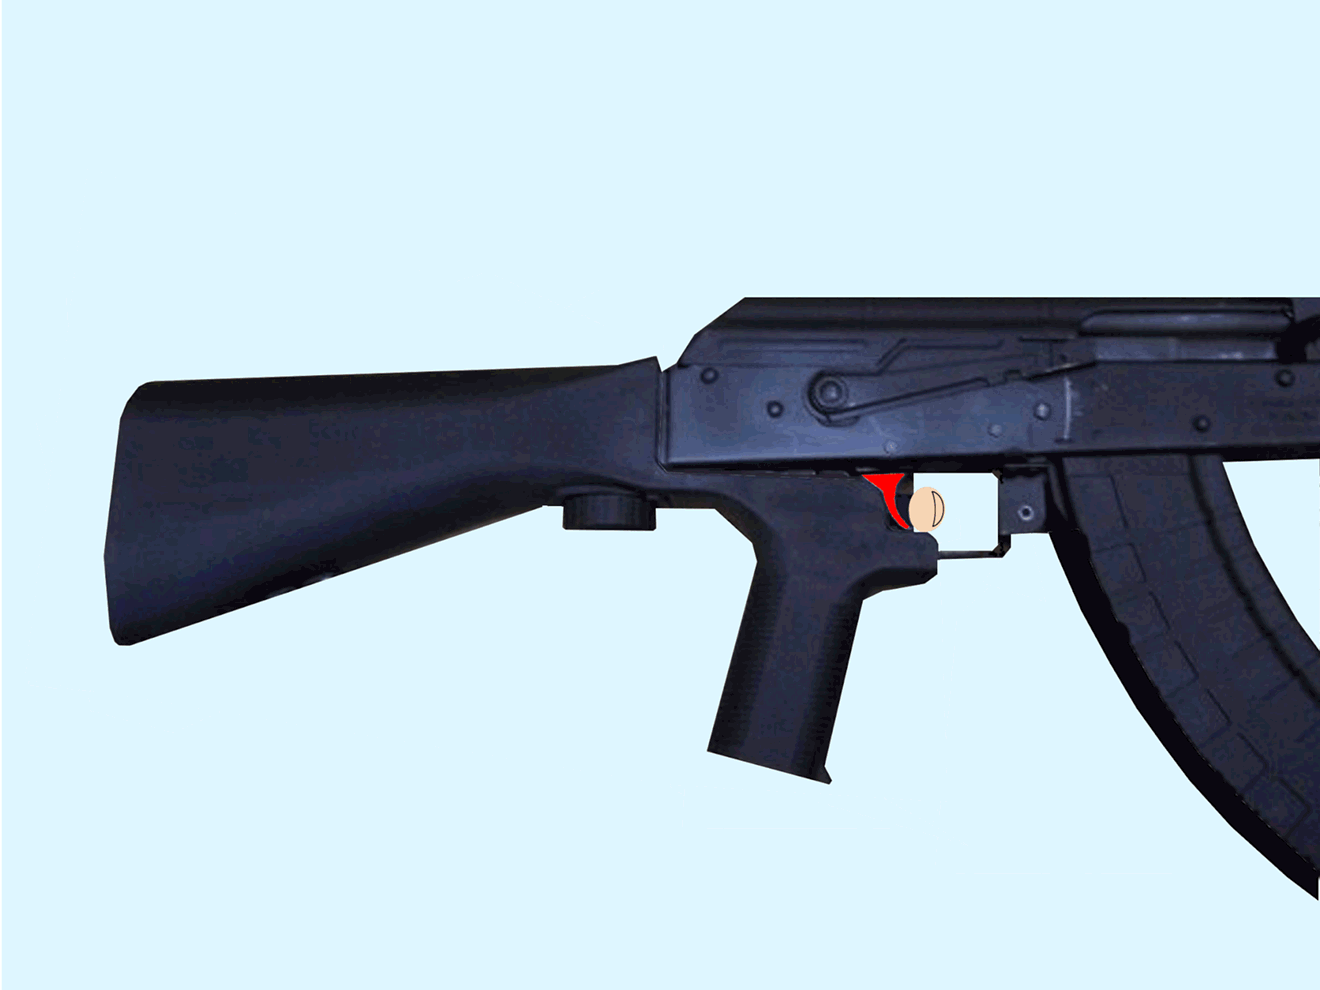 How a bump stock works